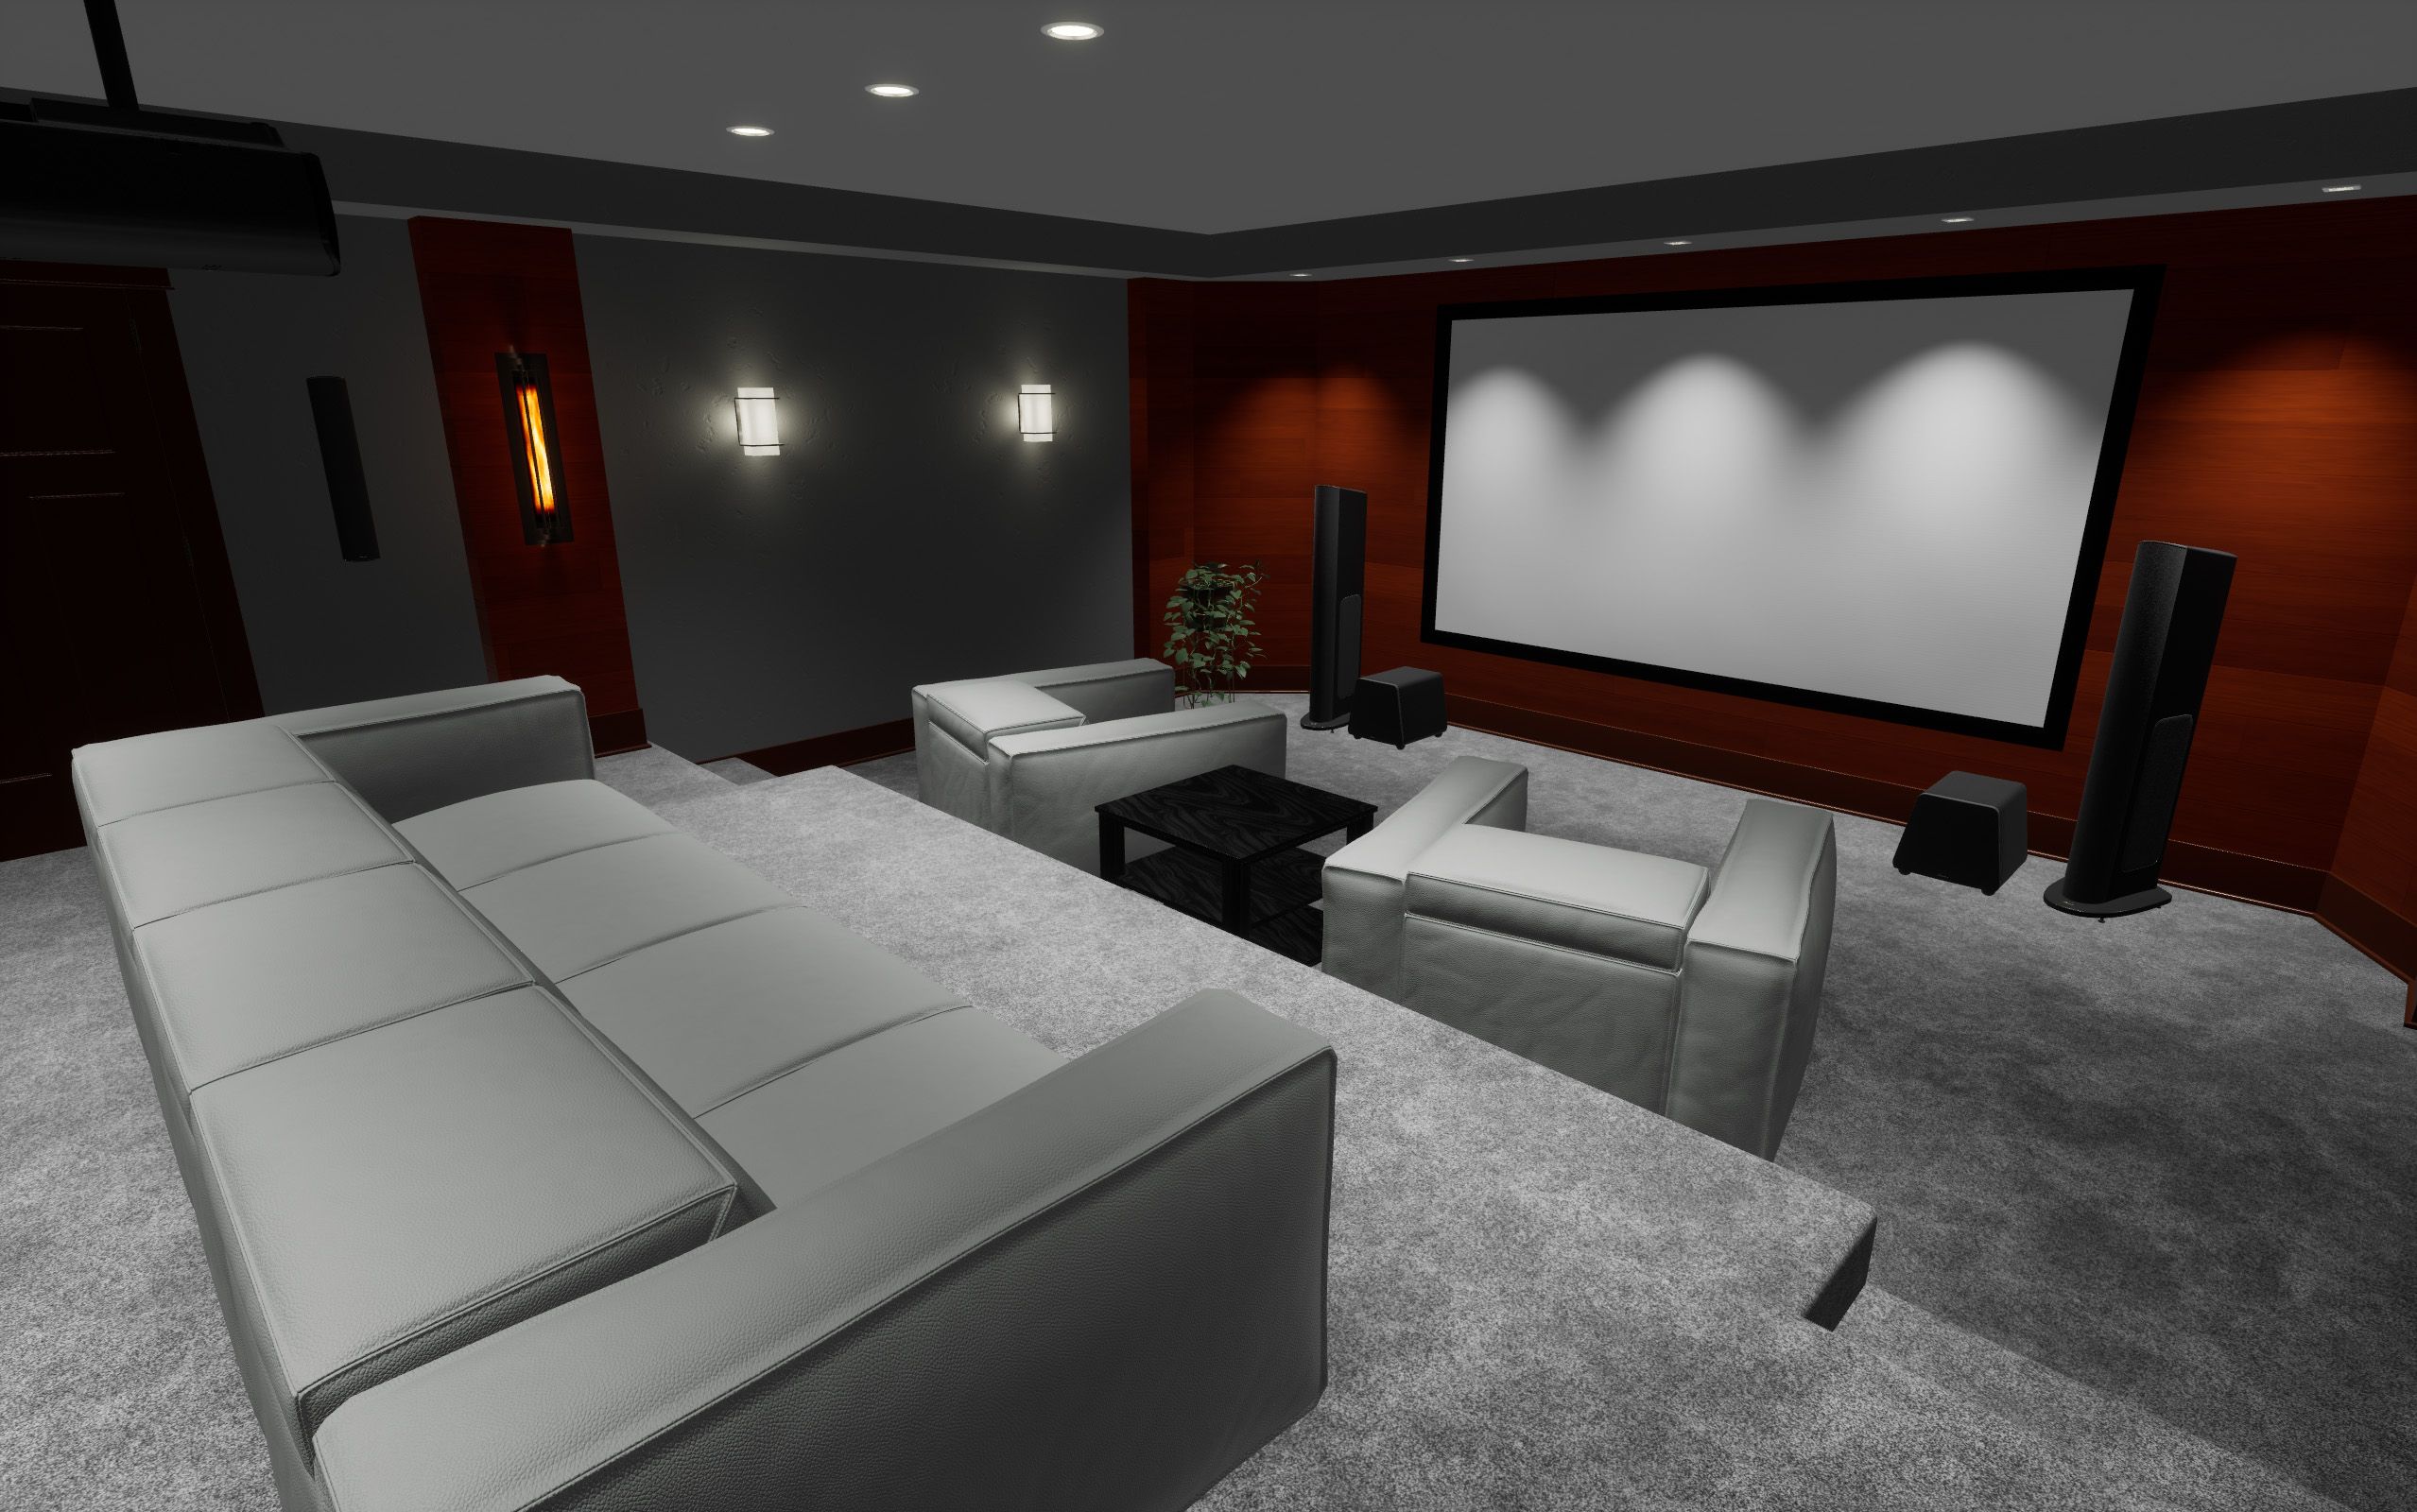 Home Theater Seating Park City, Smart Home Automation, Virtual Reality, Interior Design